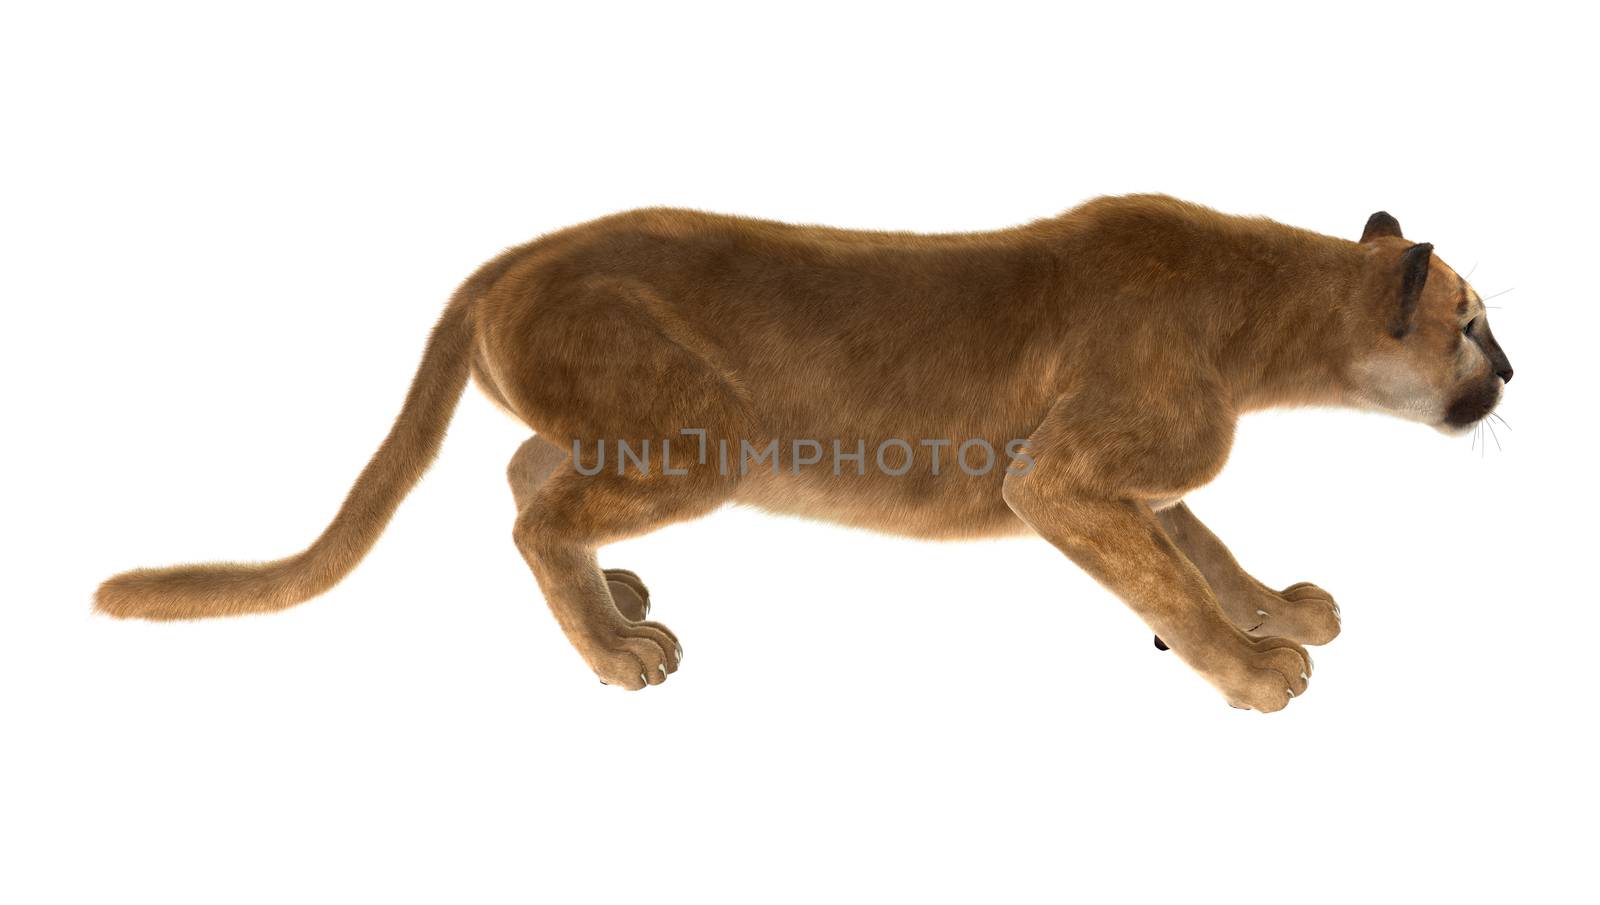 3D digital render of a big cat puma hunting iisolated on white background